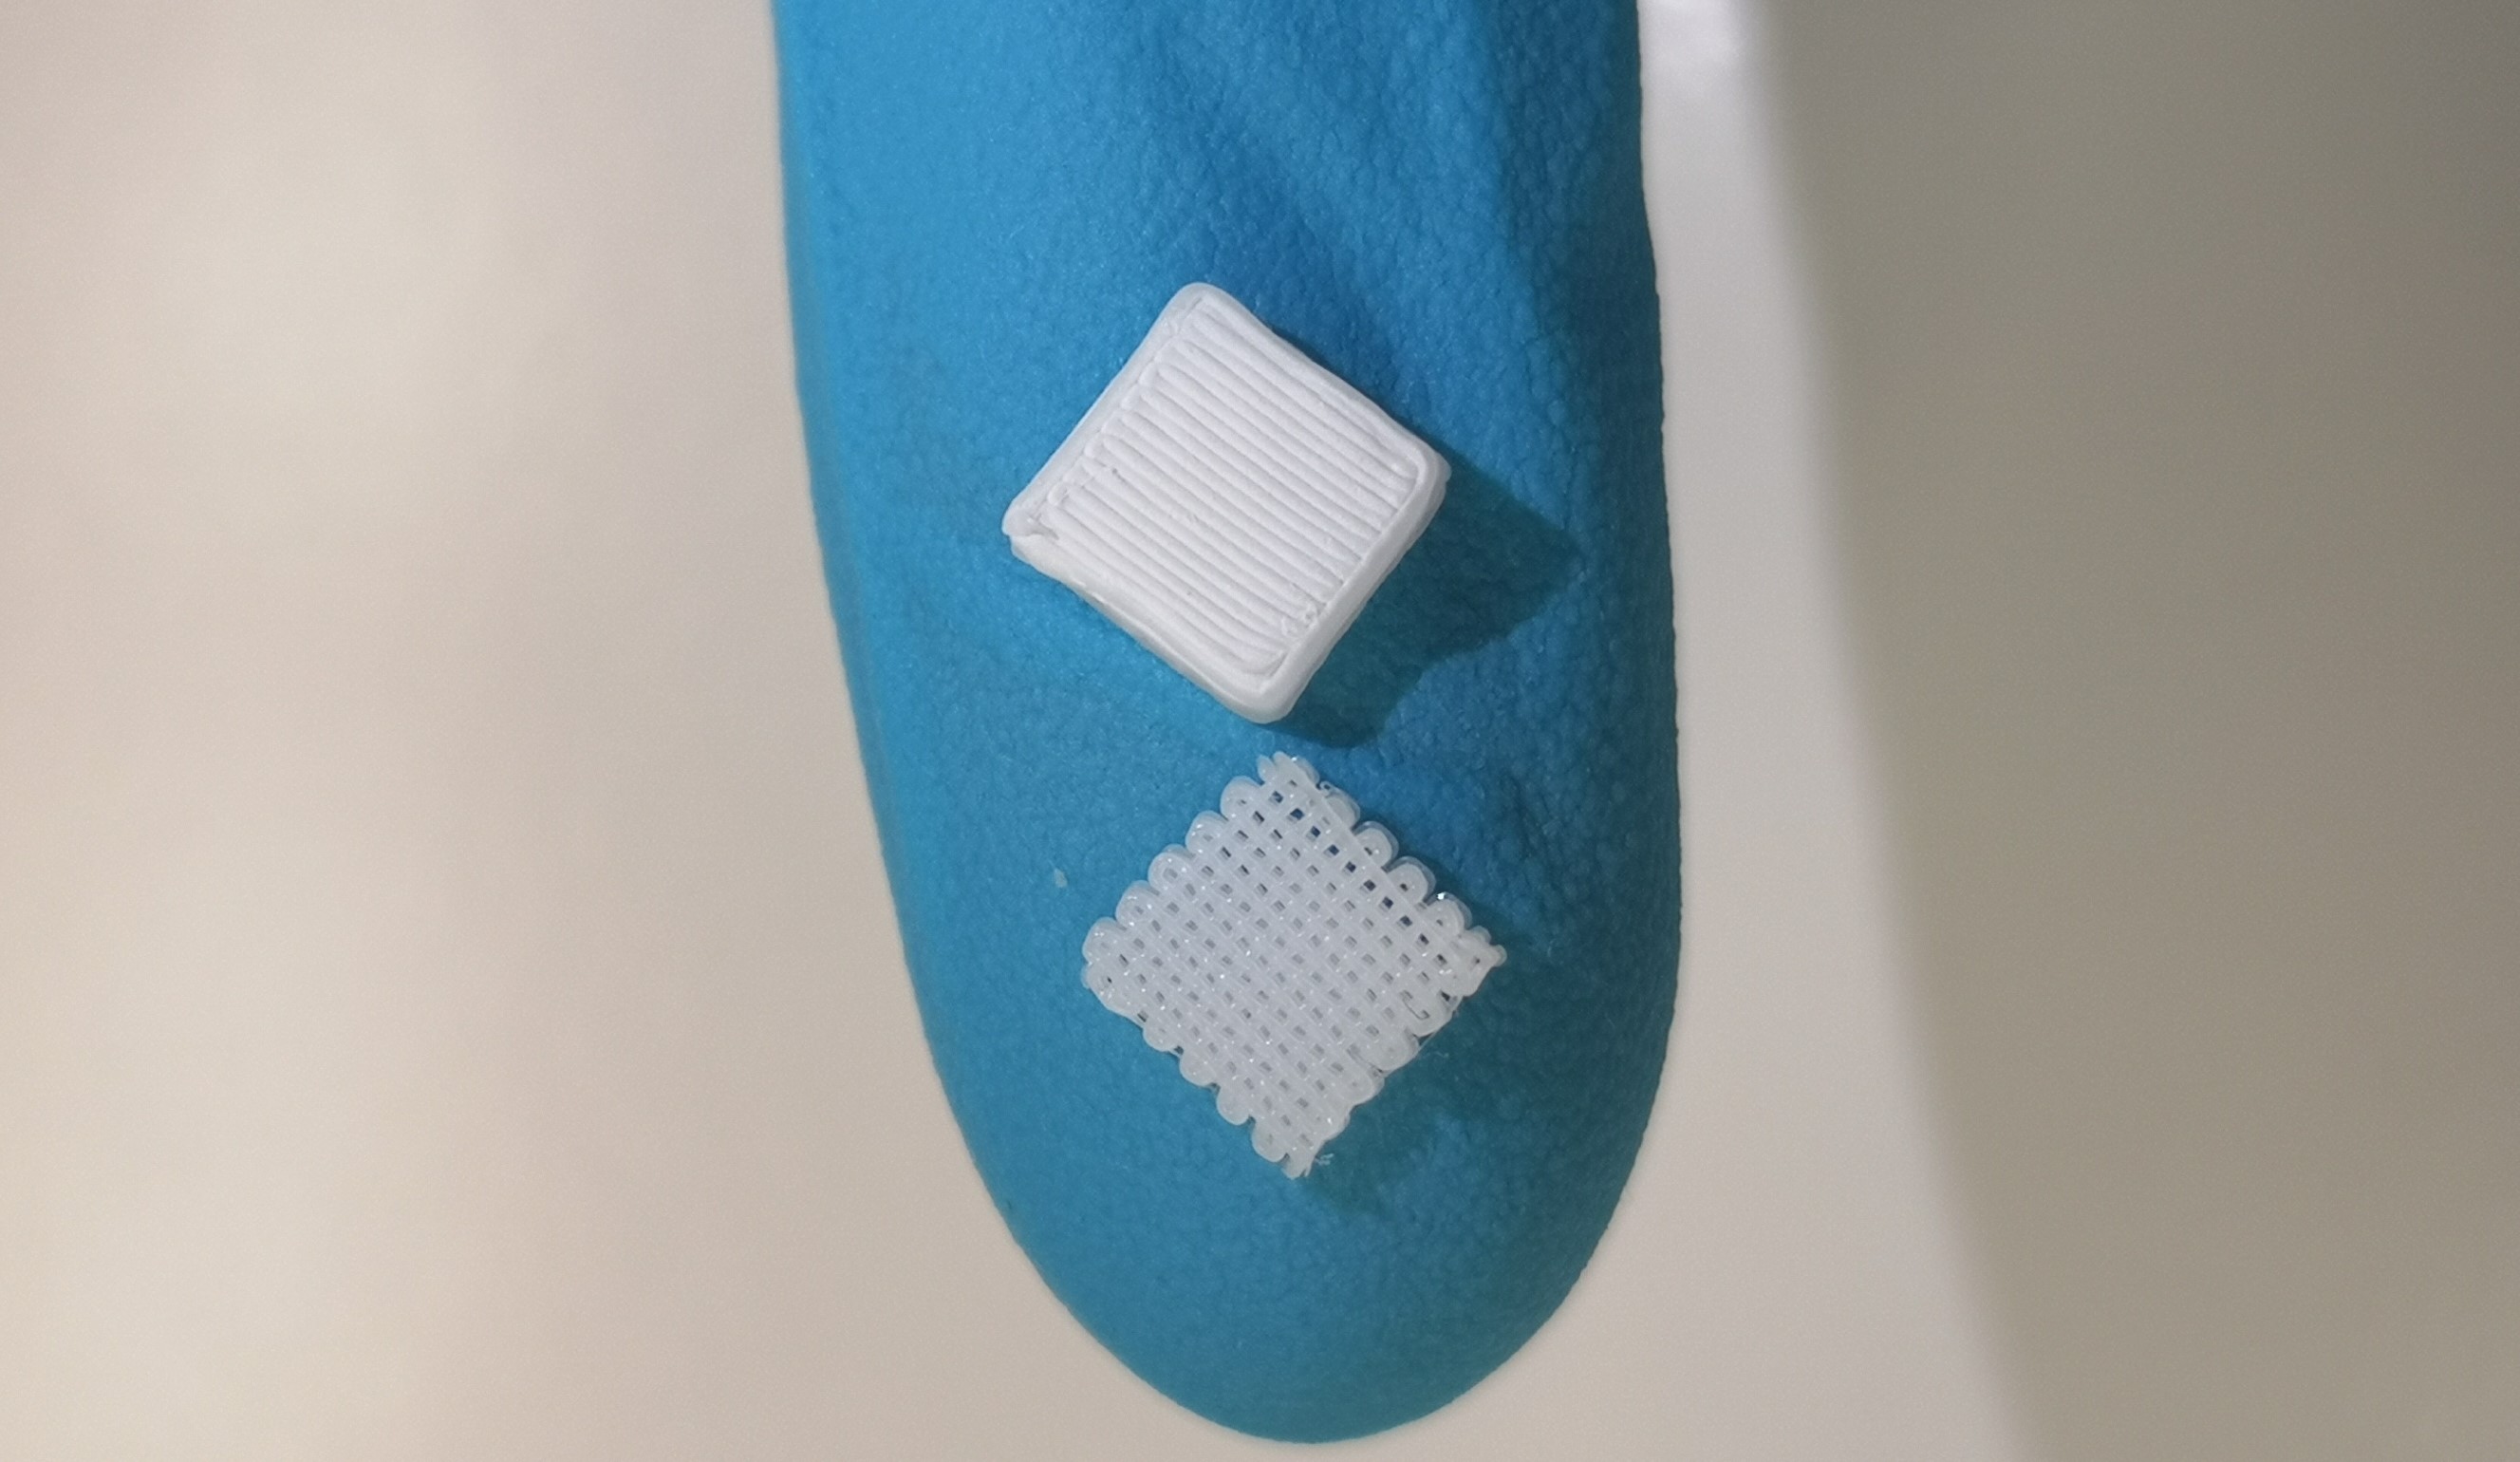 Solid 3D printed oral drug delivery device housing an active liquid ingredient inside. Photo via MLU.